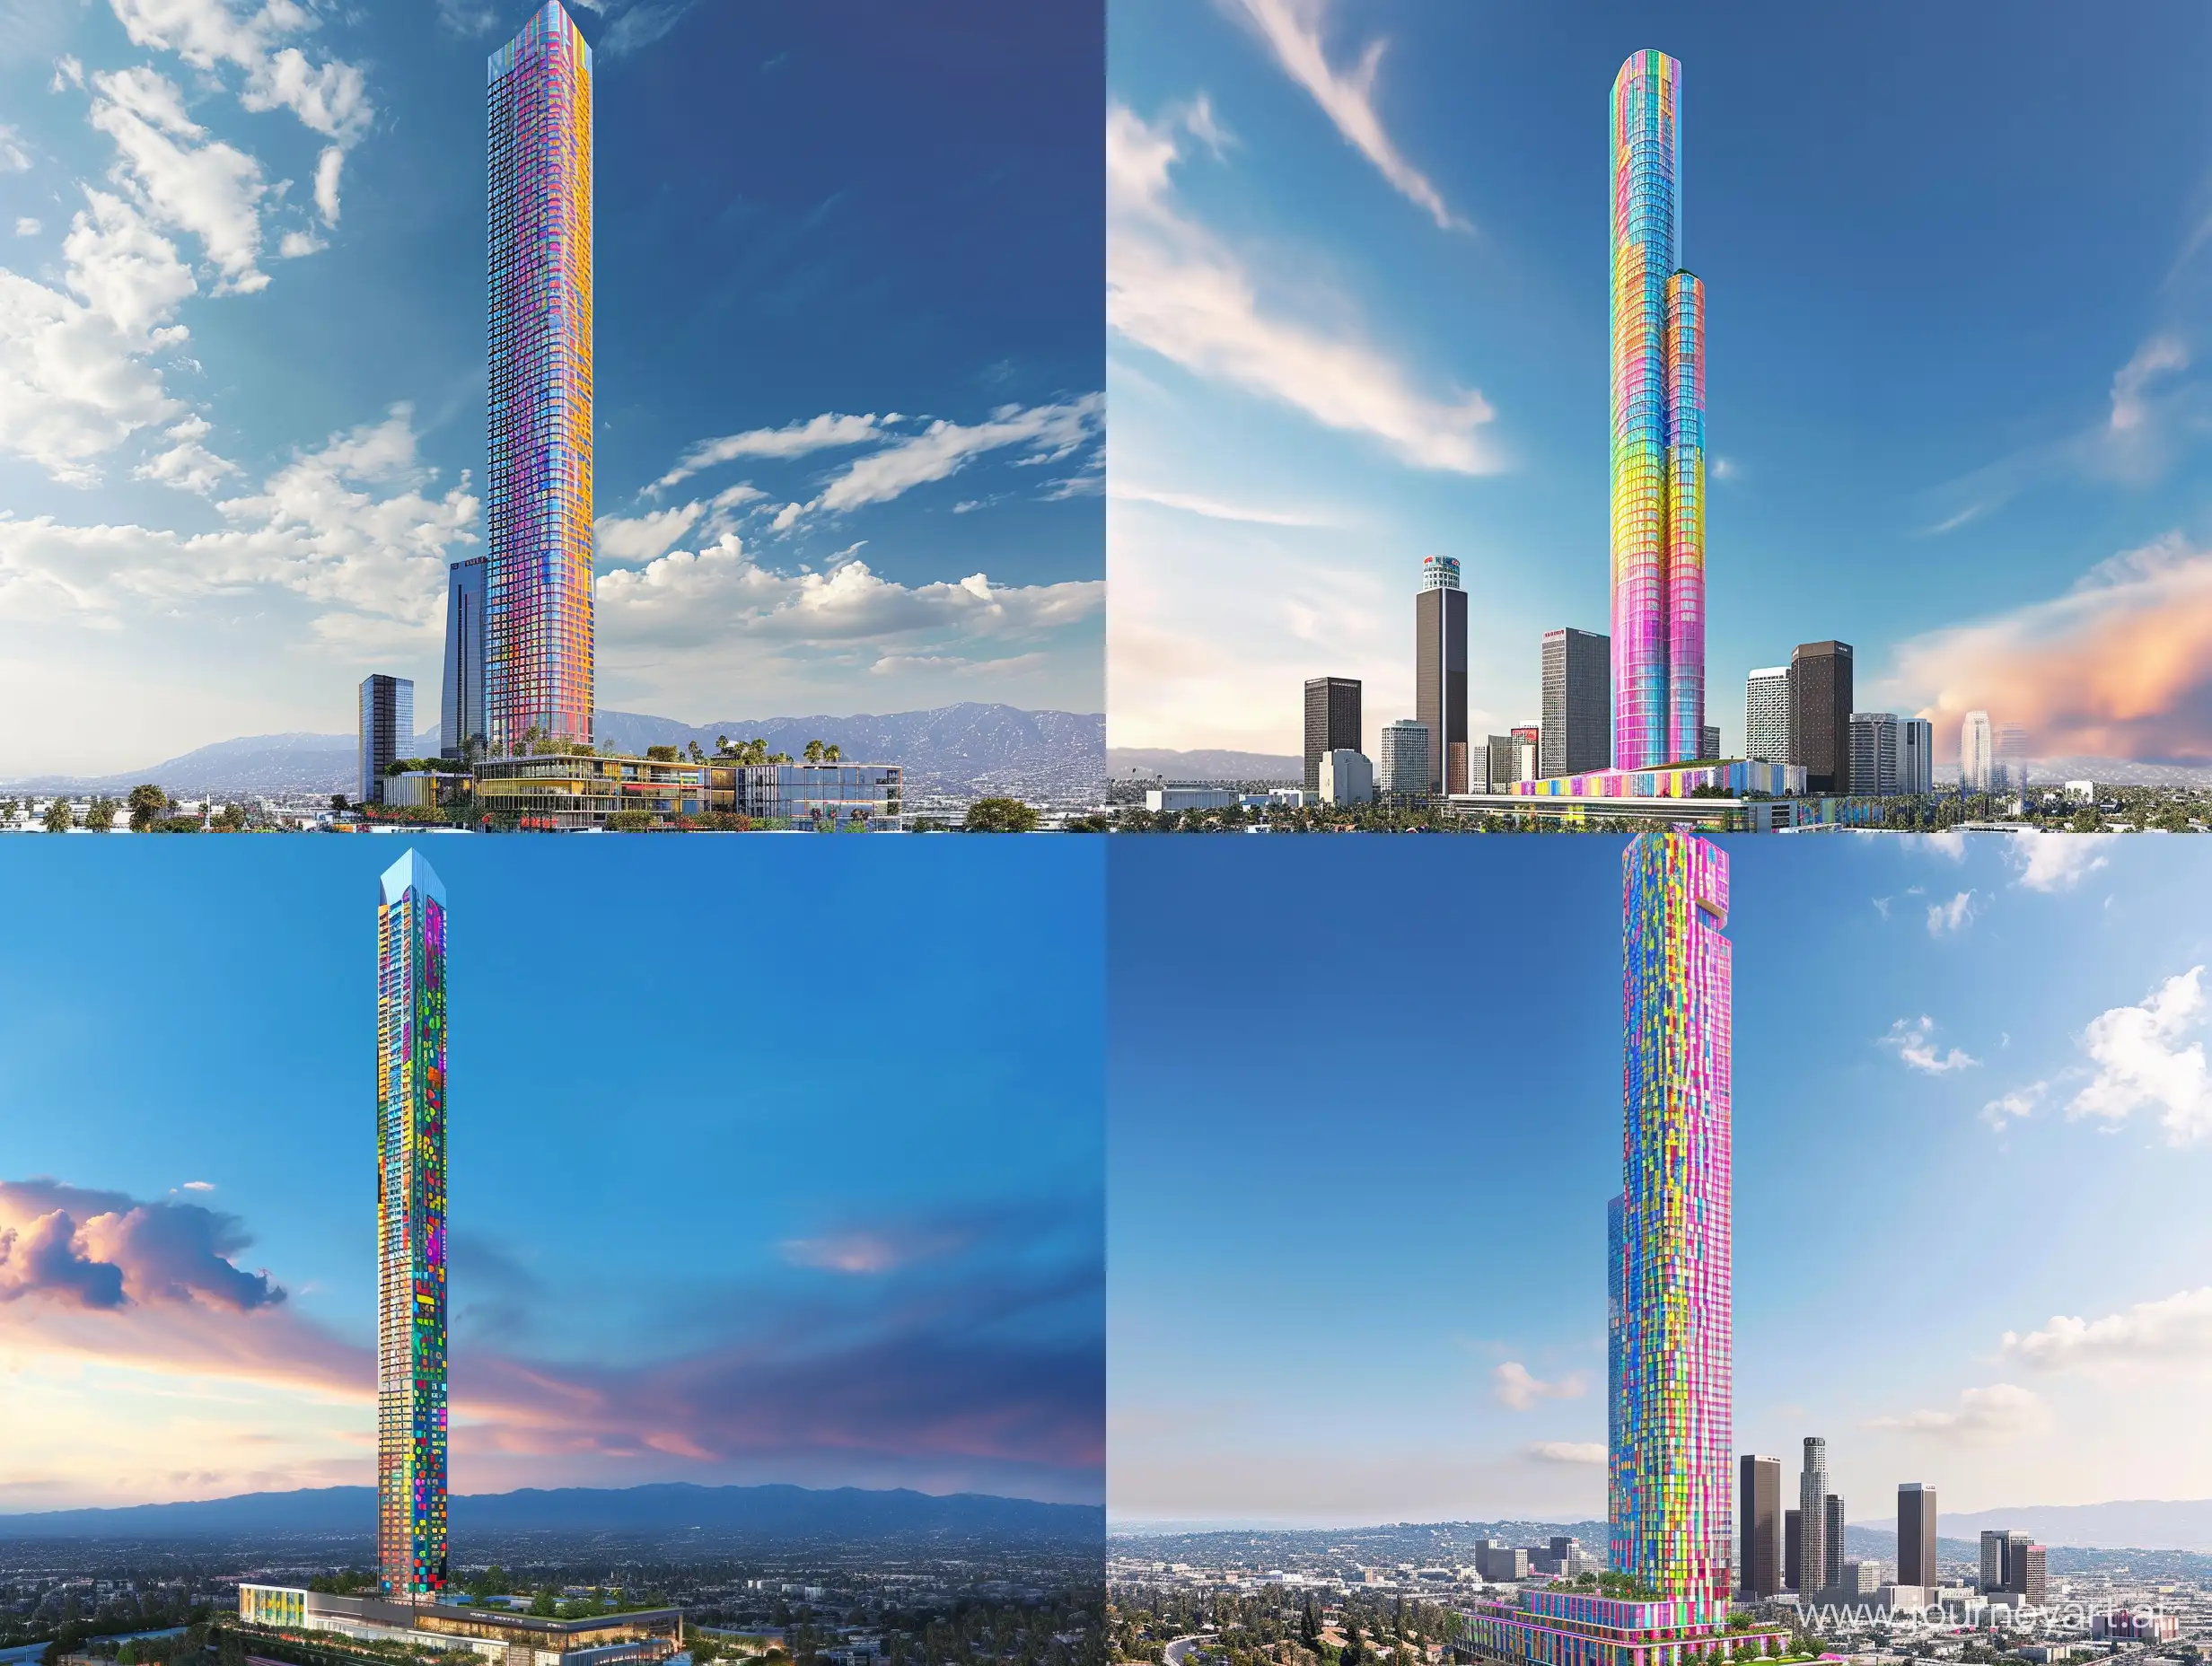 a modern skyscraper with a height of at least 500 meters with a colorful exterior designs inspired by traditional Turkish architecture which suits the skyline of Los Angeles